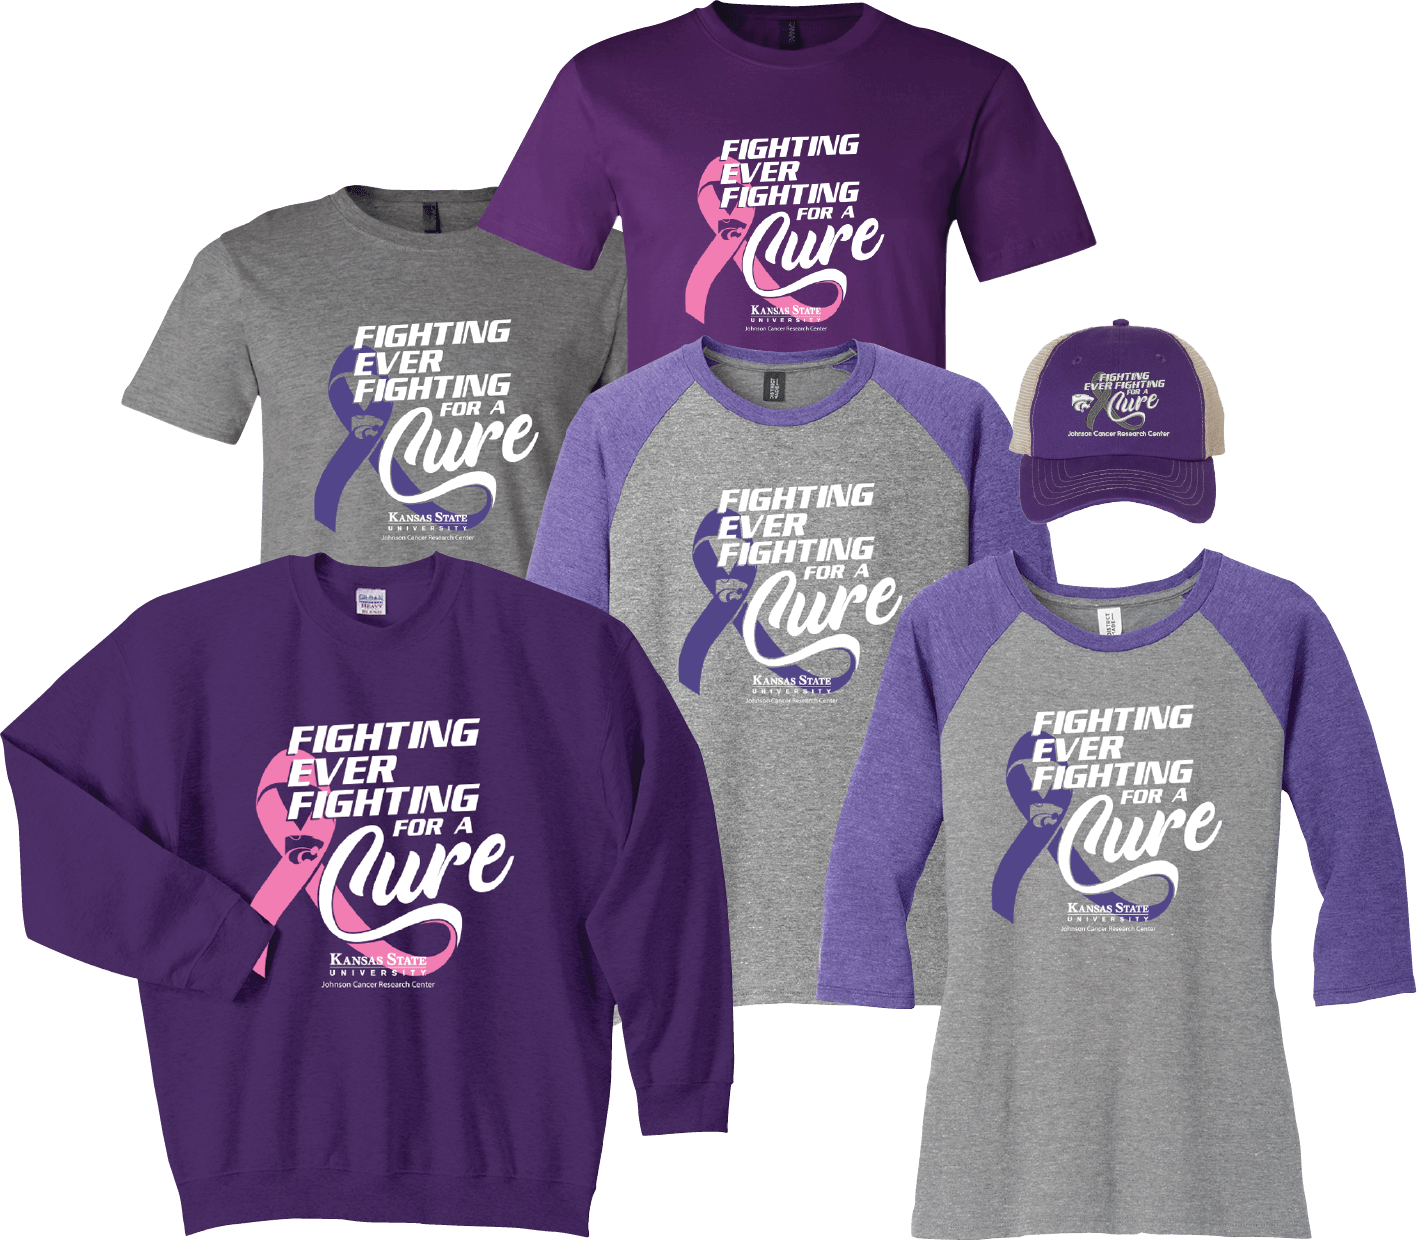 Fighting for a Cure shirts and hat 2021